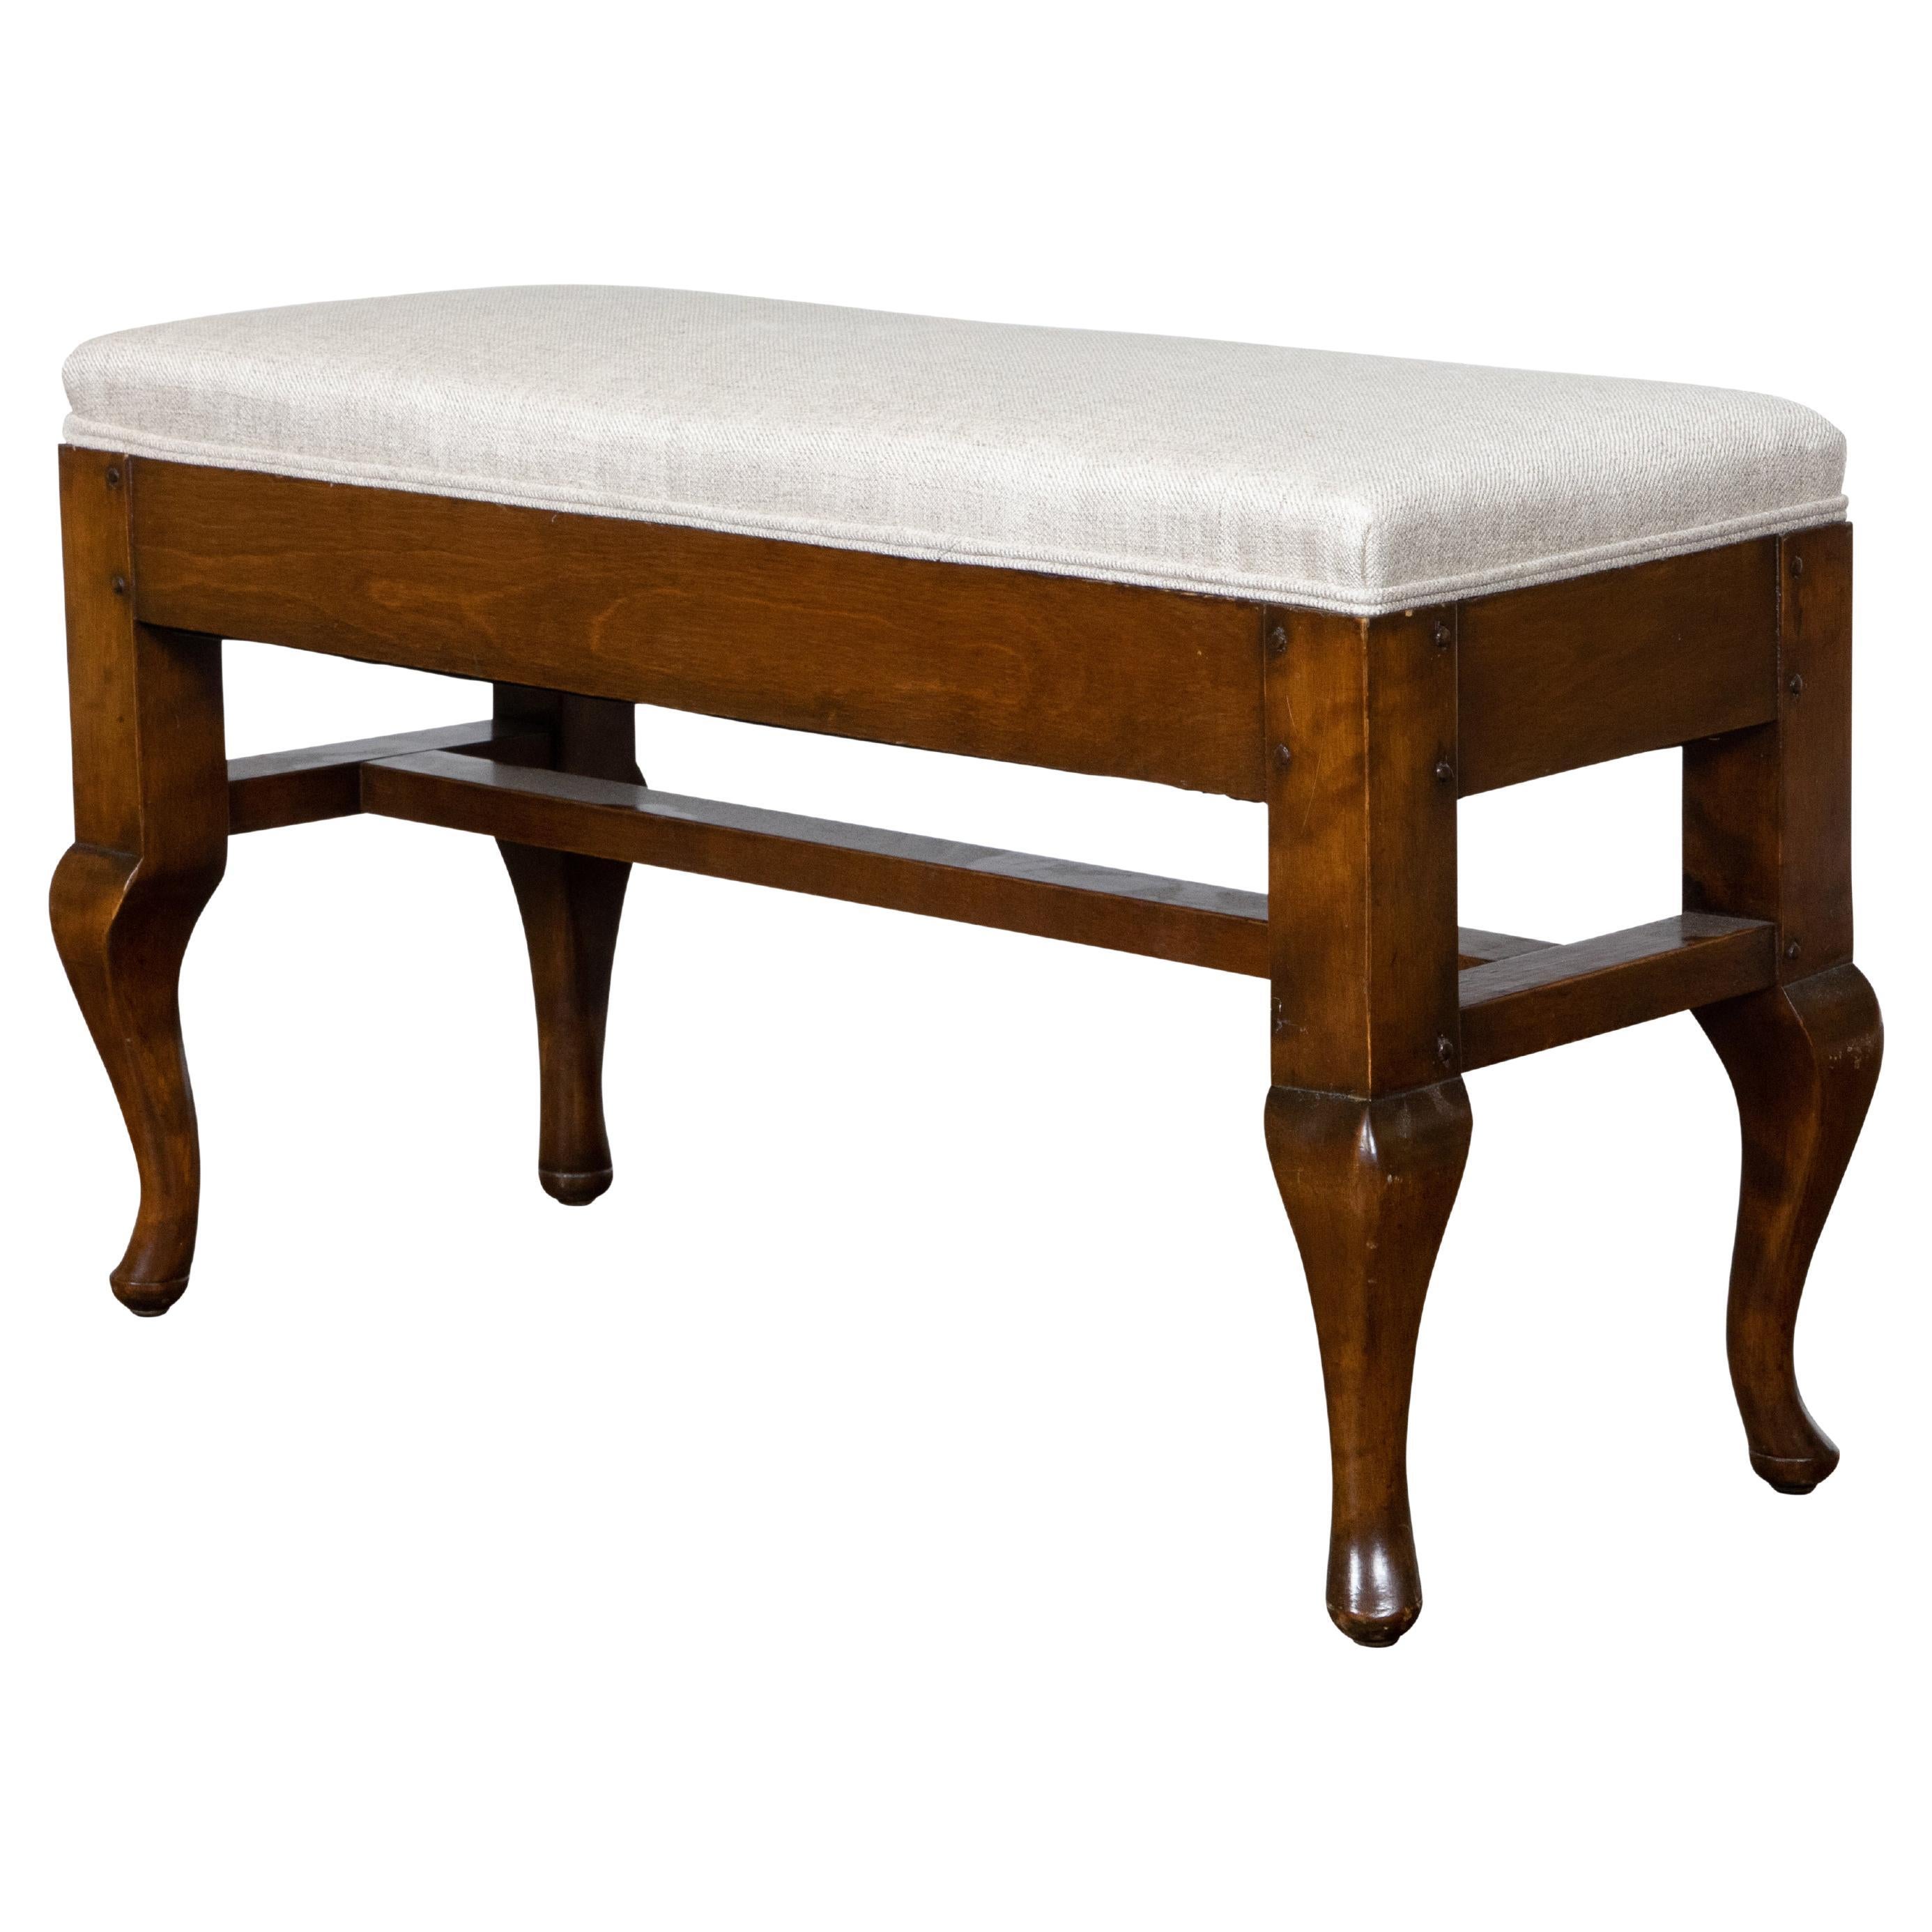 Small French 1800s Wood Bench with Curving Legs, Cross Stretcher and Upholstery